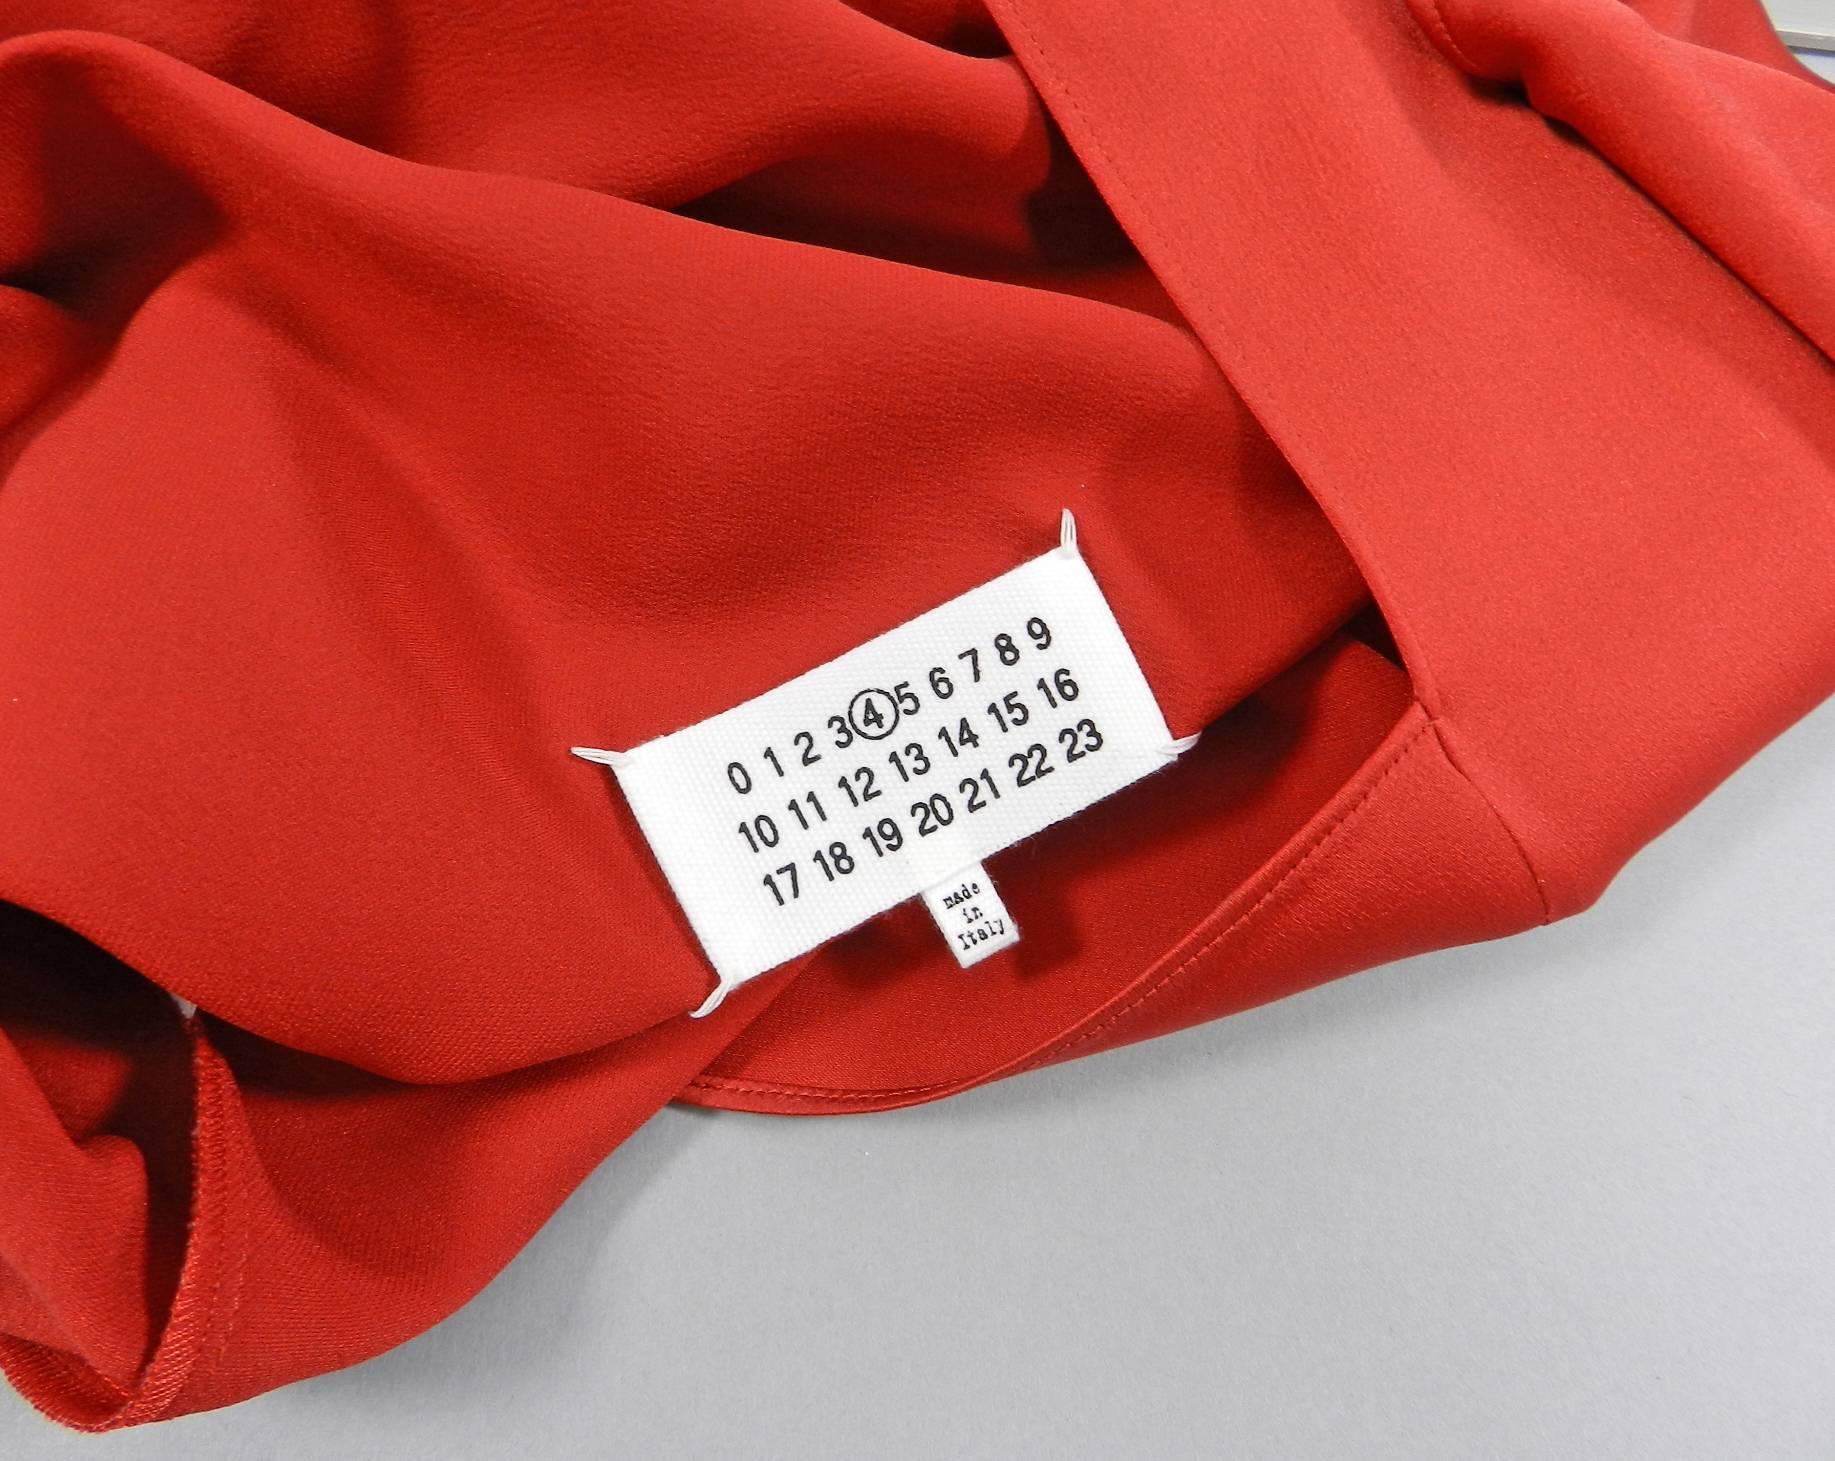 Maison Martin Margiela Red Silk Satin Bias 1930 style dress / gown.  Bright lipstick red satin (57% acdetate, 26 polyamide, 17 silk).  Tagged size IT 44 (USA 8). Excellent clean pre-owned condition. Pull over style with no zippers or fasteners. 